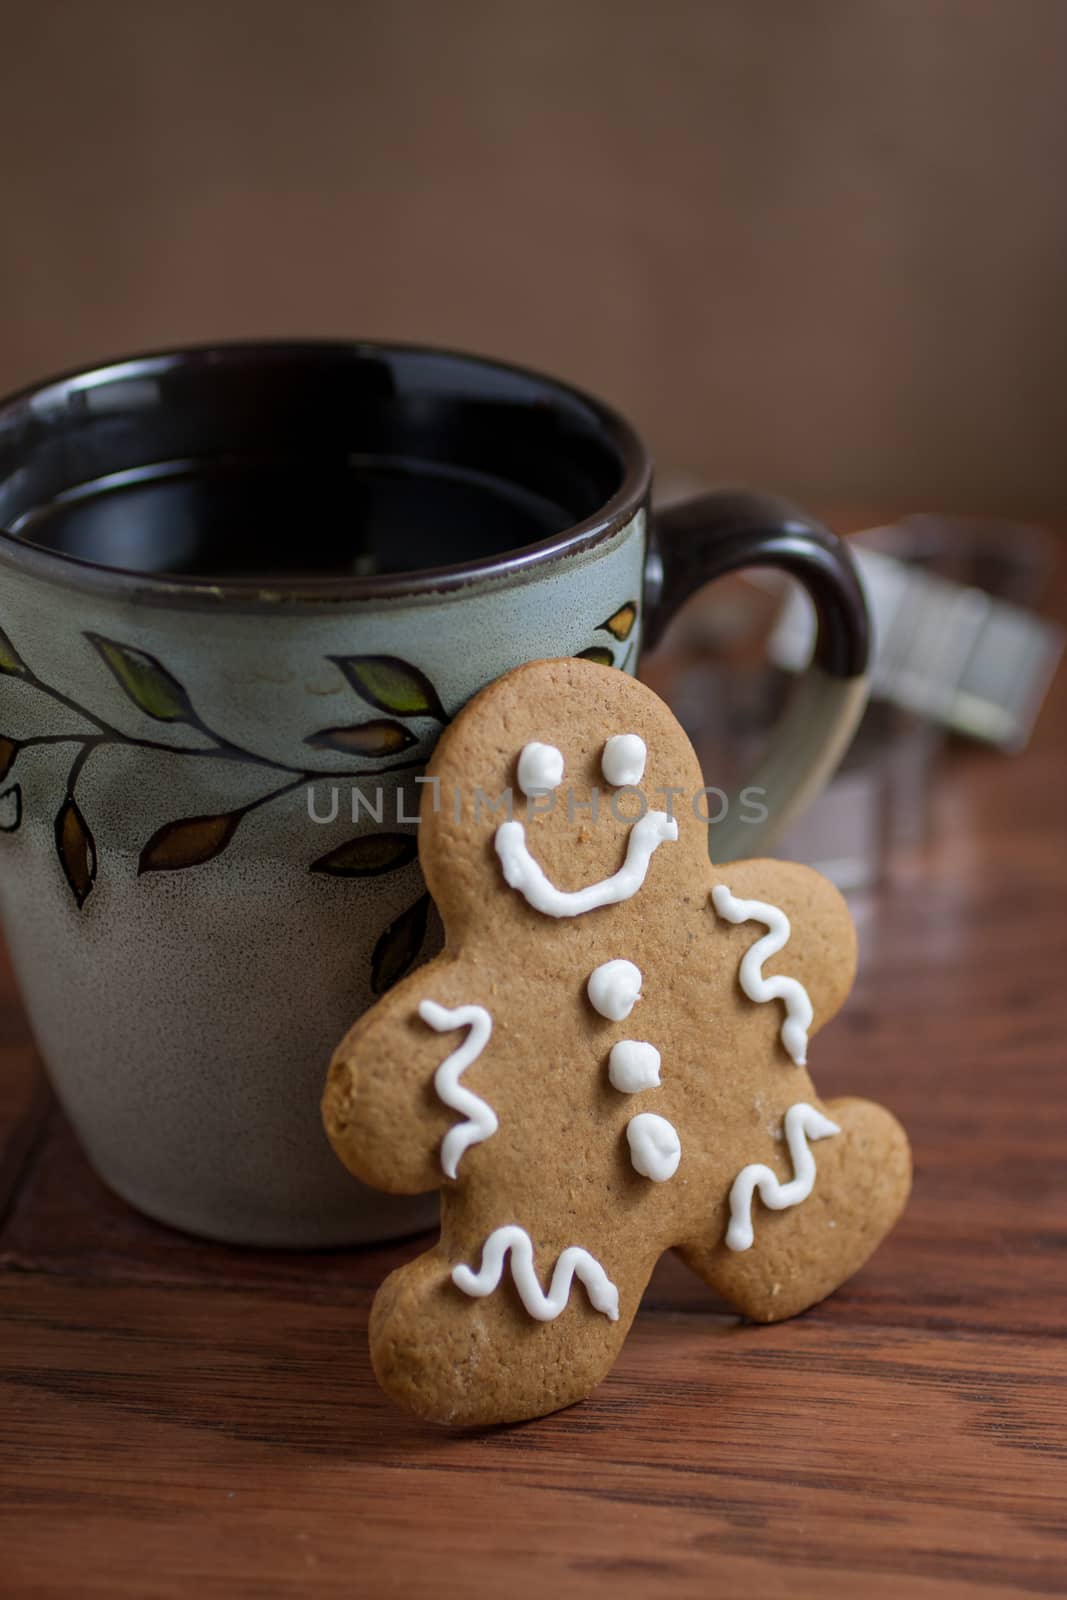 Coffee and a Gingerbread Man by SouthernLightStudios